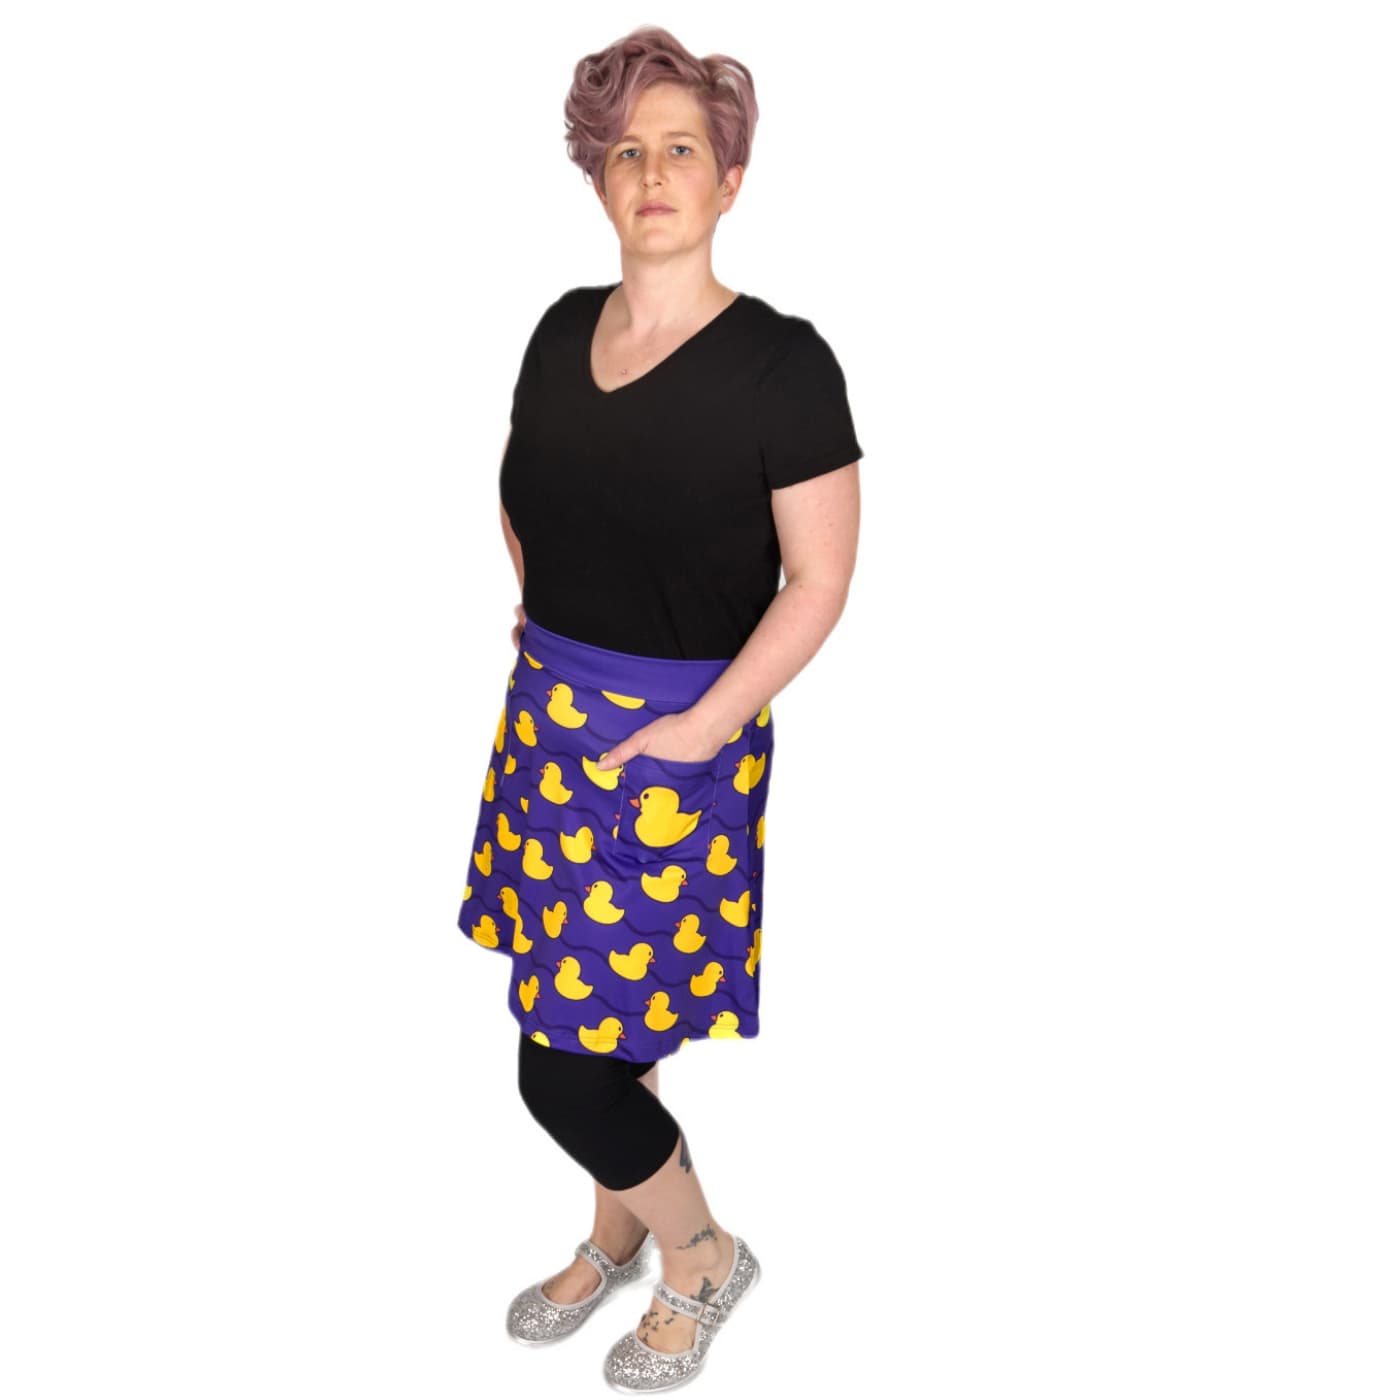 Yellow Ducky Short Skirt by RainbowsAndFairies.com.au (Rubber Duck - Yellow Duck - Polka Dot - Kitsch - Aline Skirt With Pockets - Vintage Inspired) - SKU: CL_SHORT_DUCKY_YEL - Pic-05